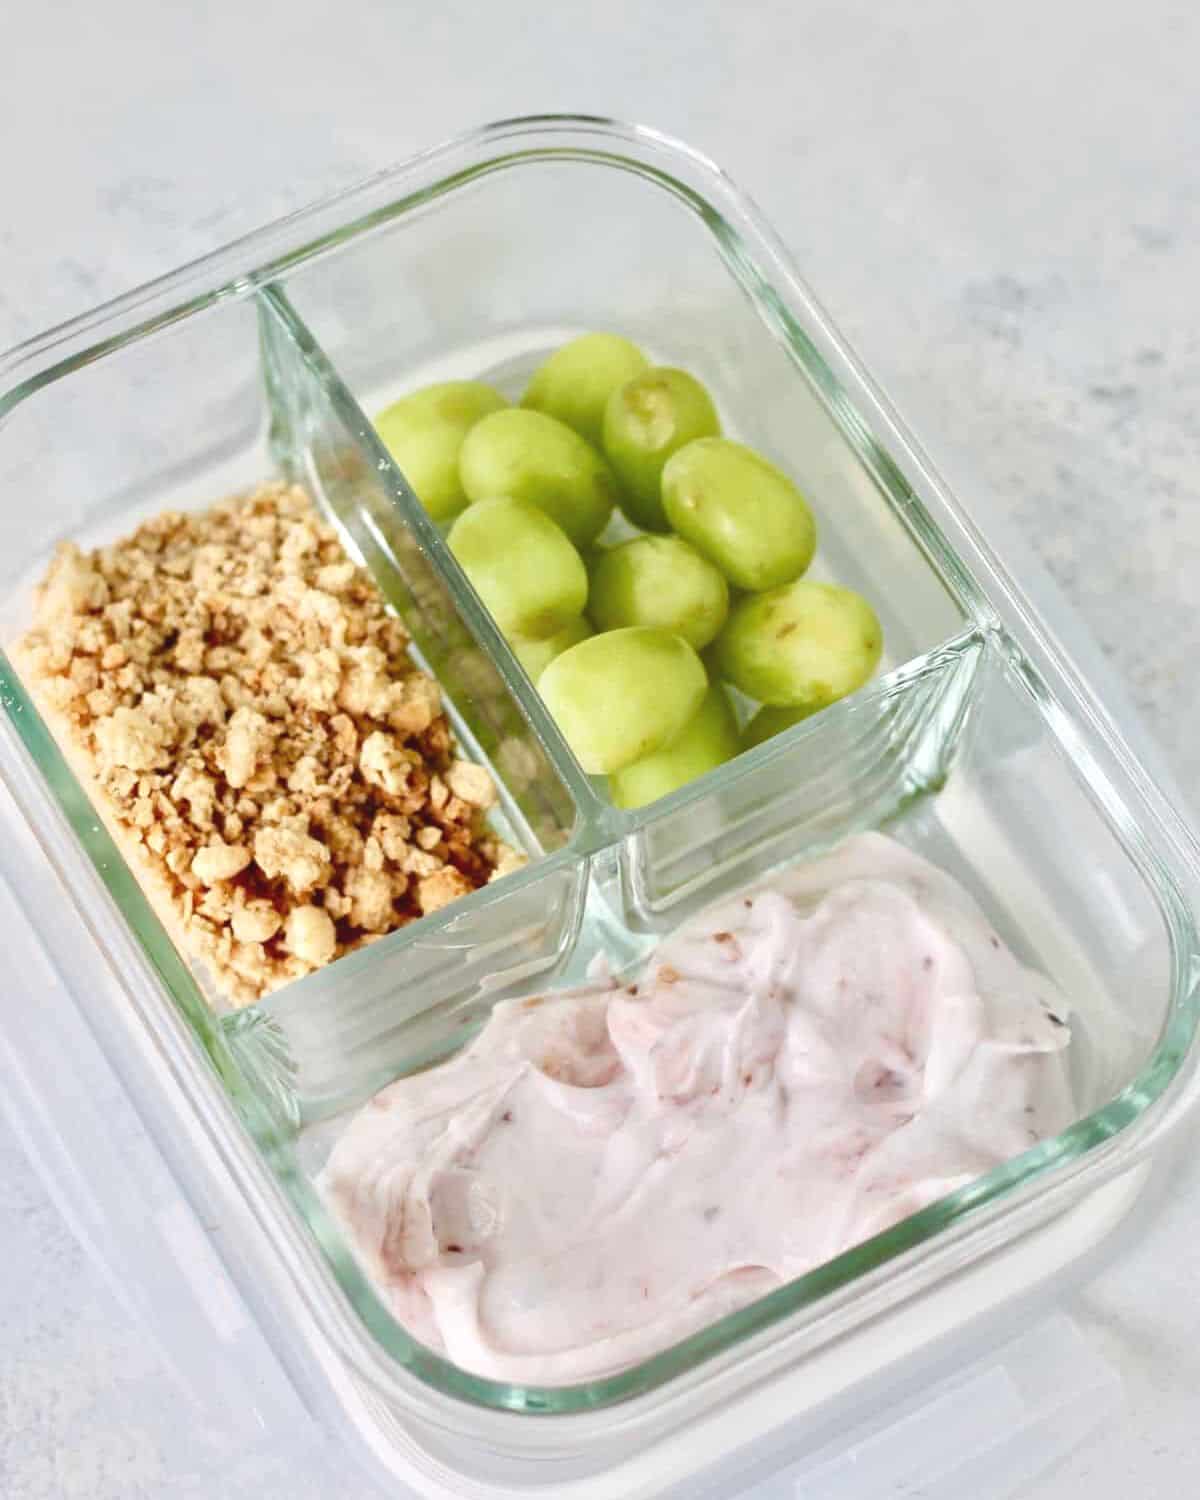 https://www.organizeyourselfskinny.com/wp-content/uploads/2022/11/meal-prep-container-blog-post-pics.jpg